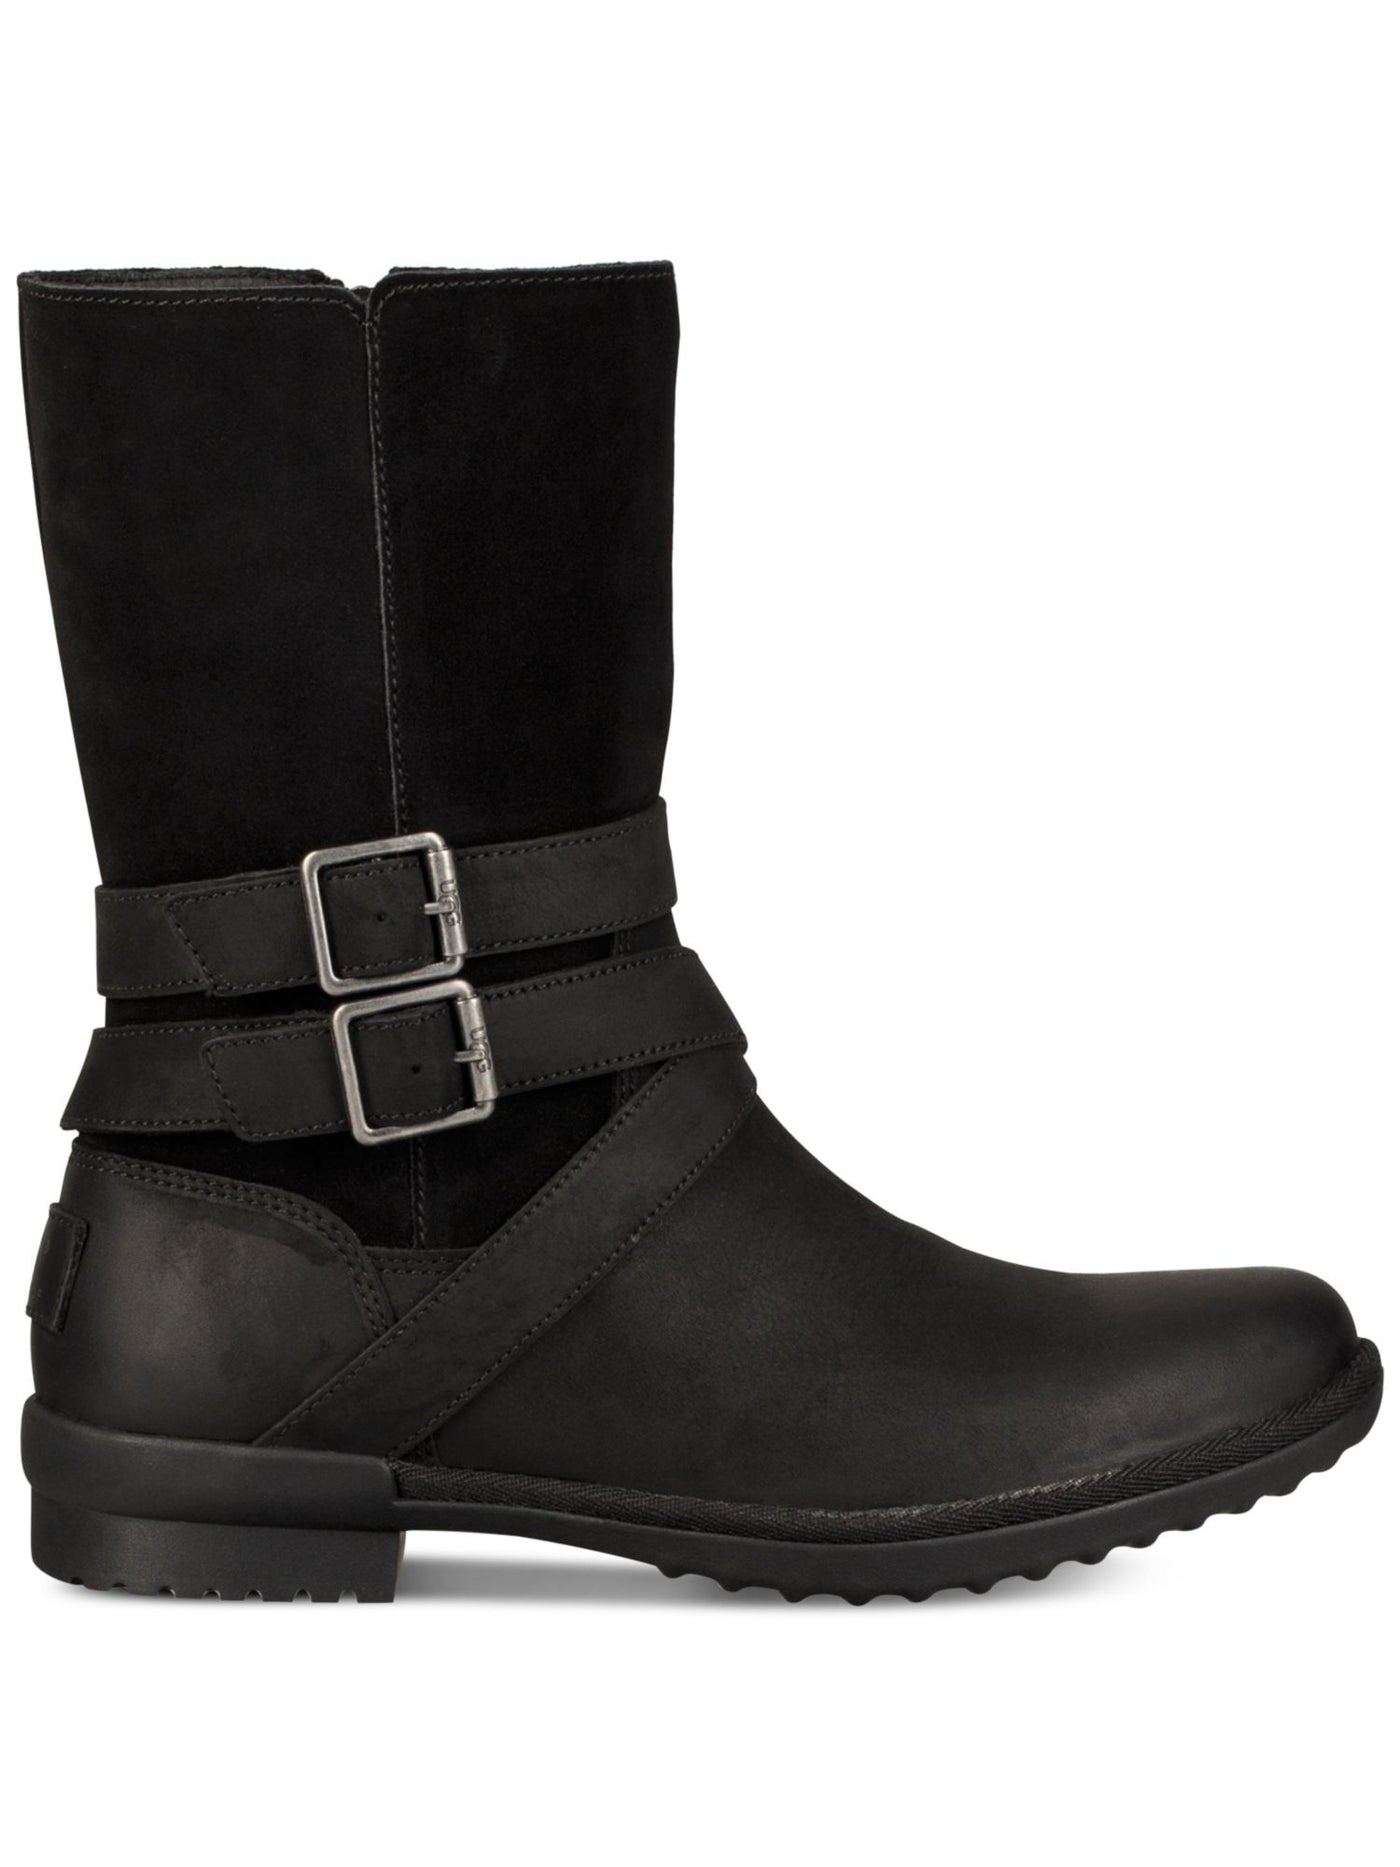 UGG Womens Black Insulated Cushioned Strappy Waterproof Buckle Accent Lorna Round Toe Zip-Up Leather Snow Boots 5.5